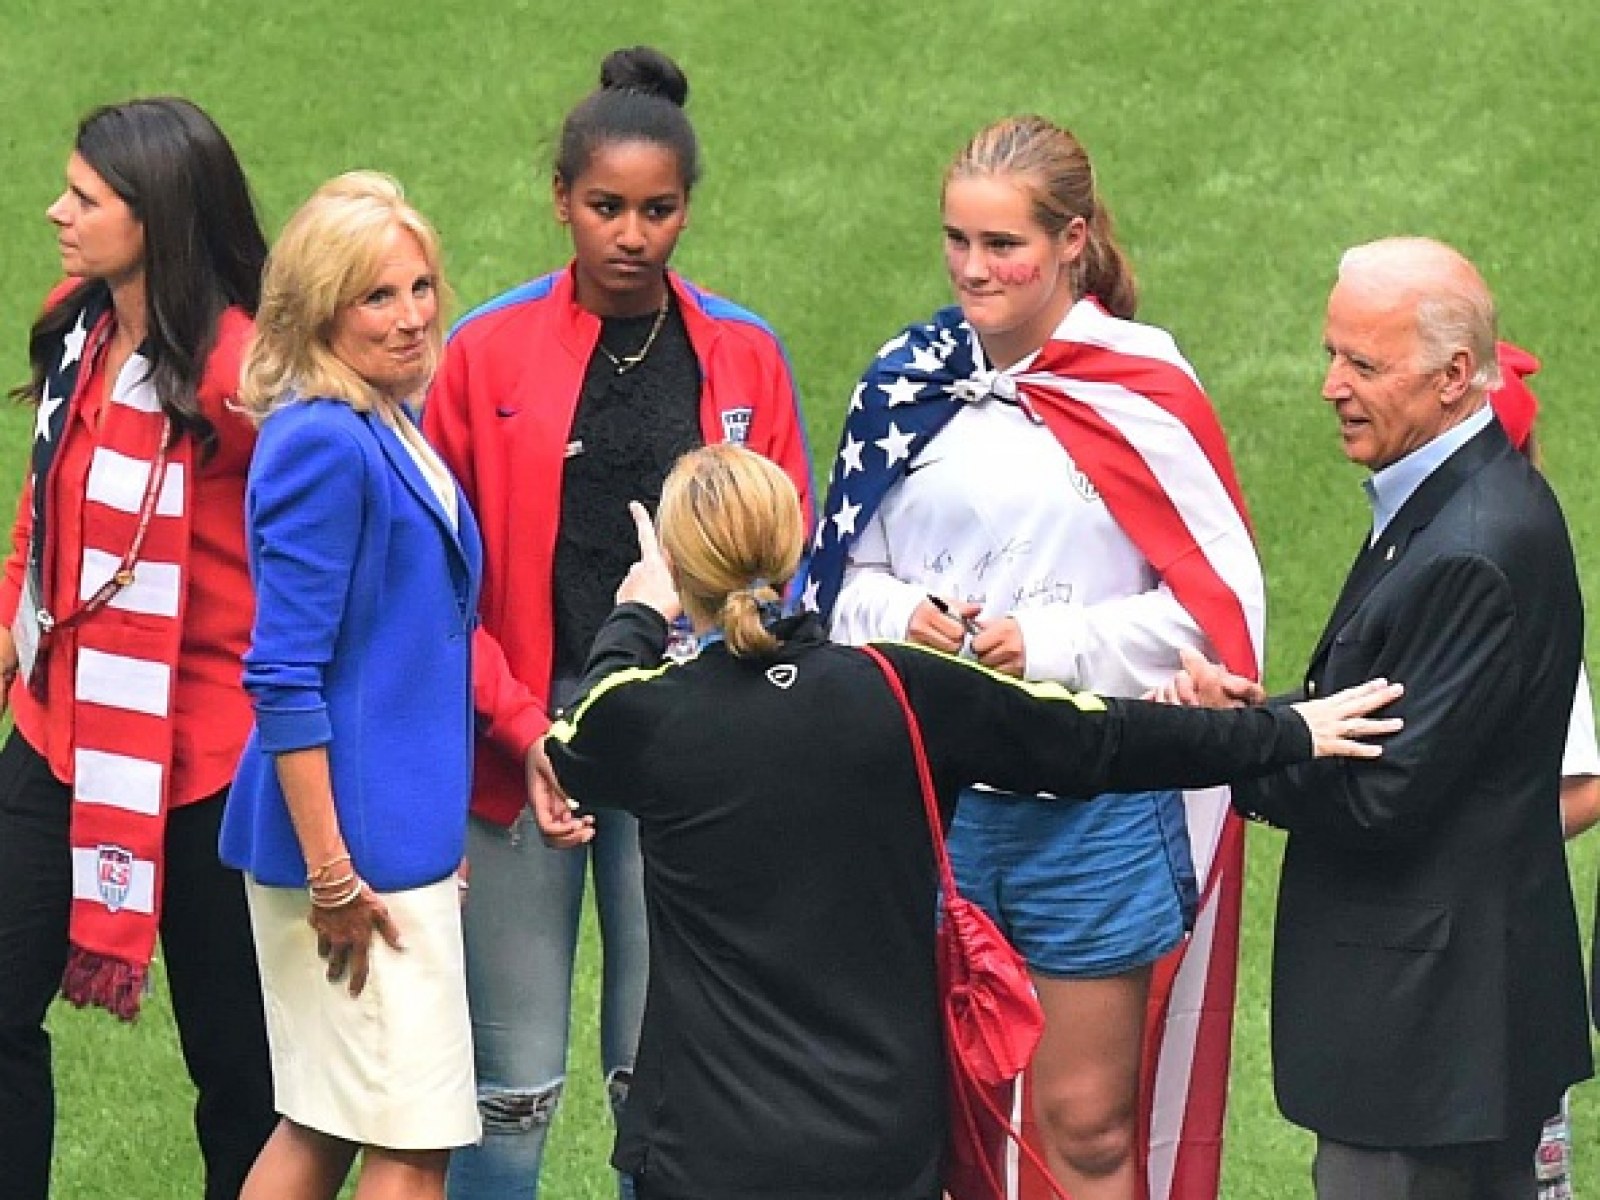 Joe biden says he would pull world cup funding from us soccer if women are denied equal pay